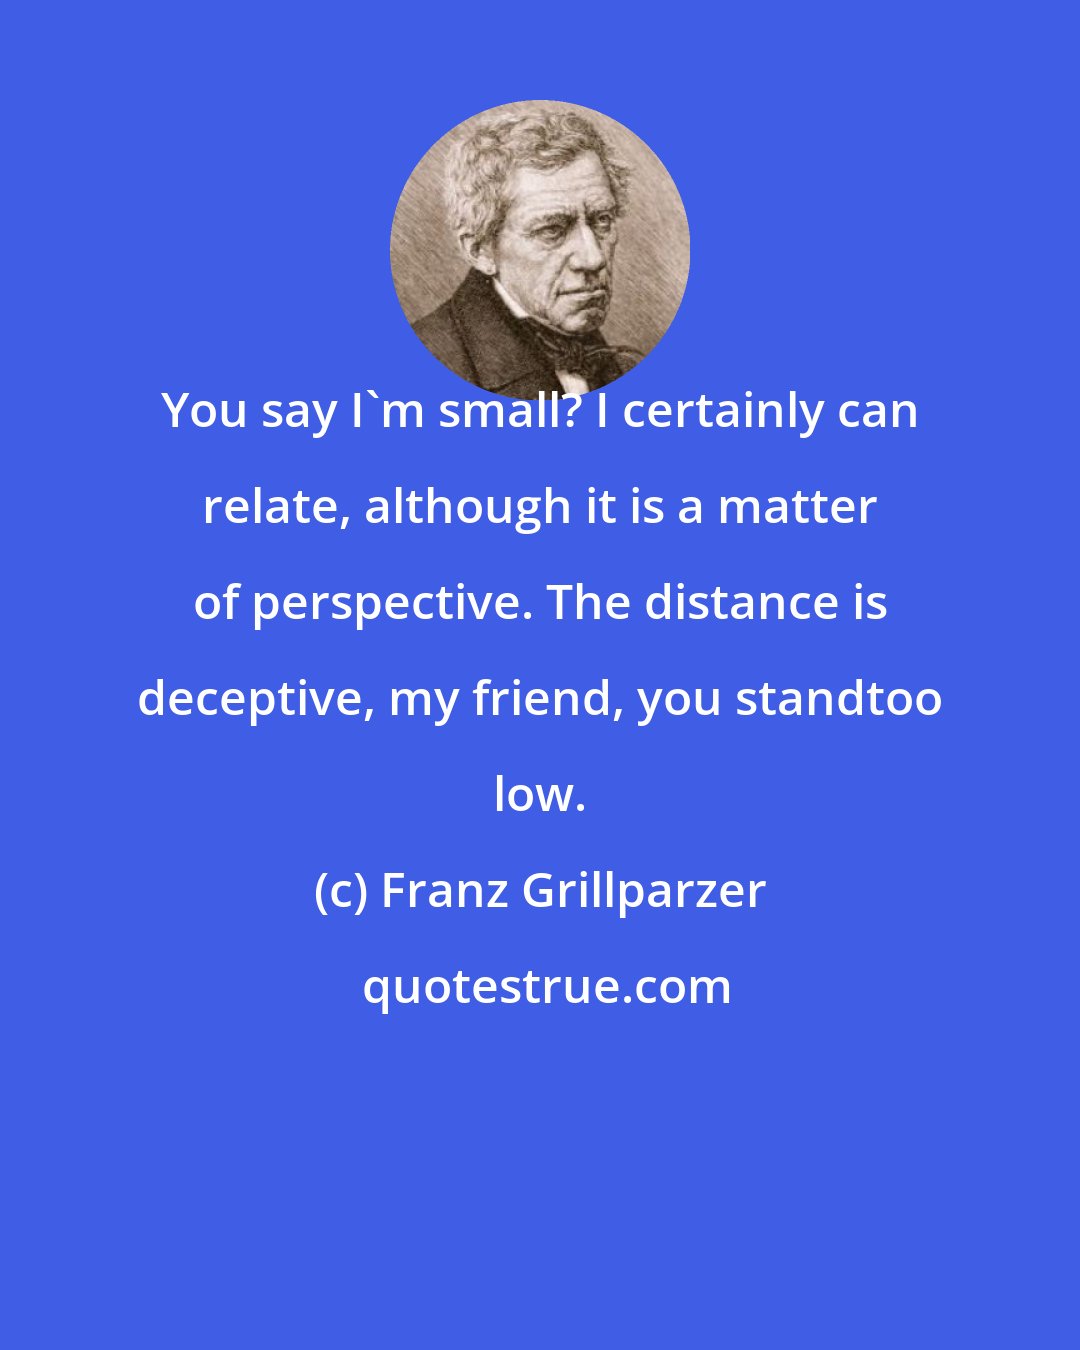 Franz Grillparzer: You say I'm small? I certainly can relate, although it is a matter of perspective. The distance is deceptive, my friend, you standtoo low.